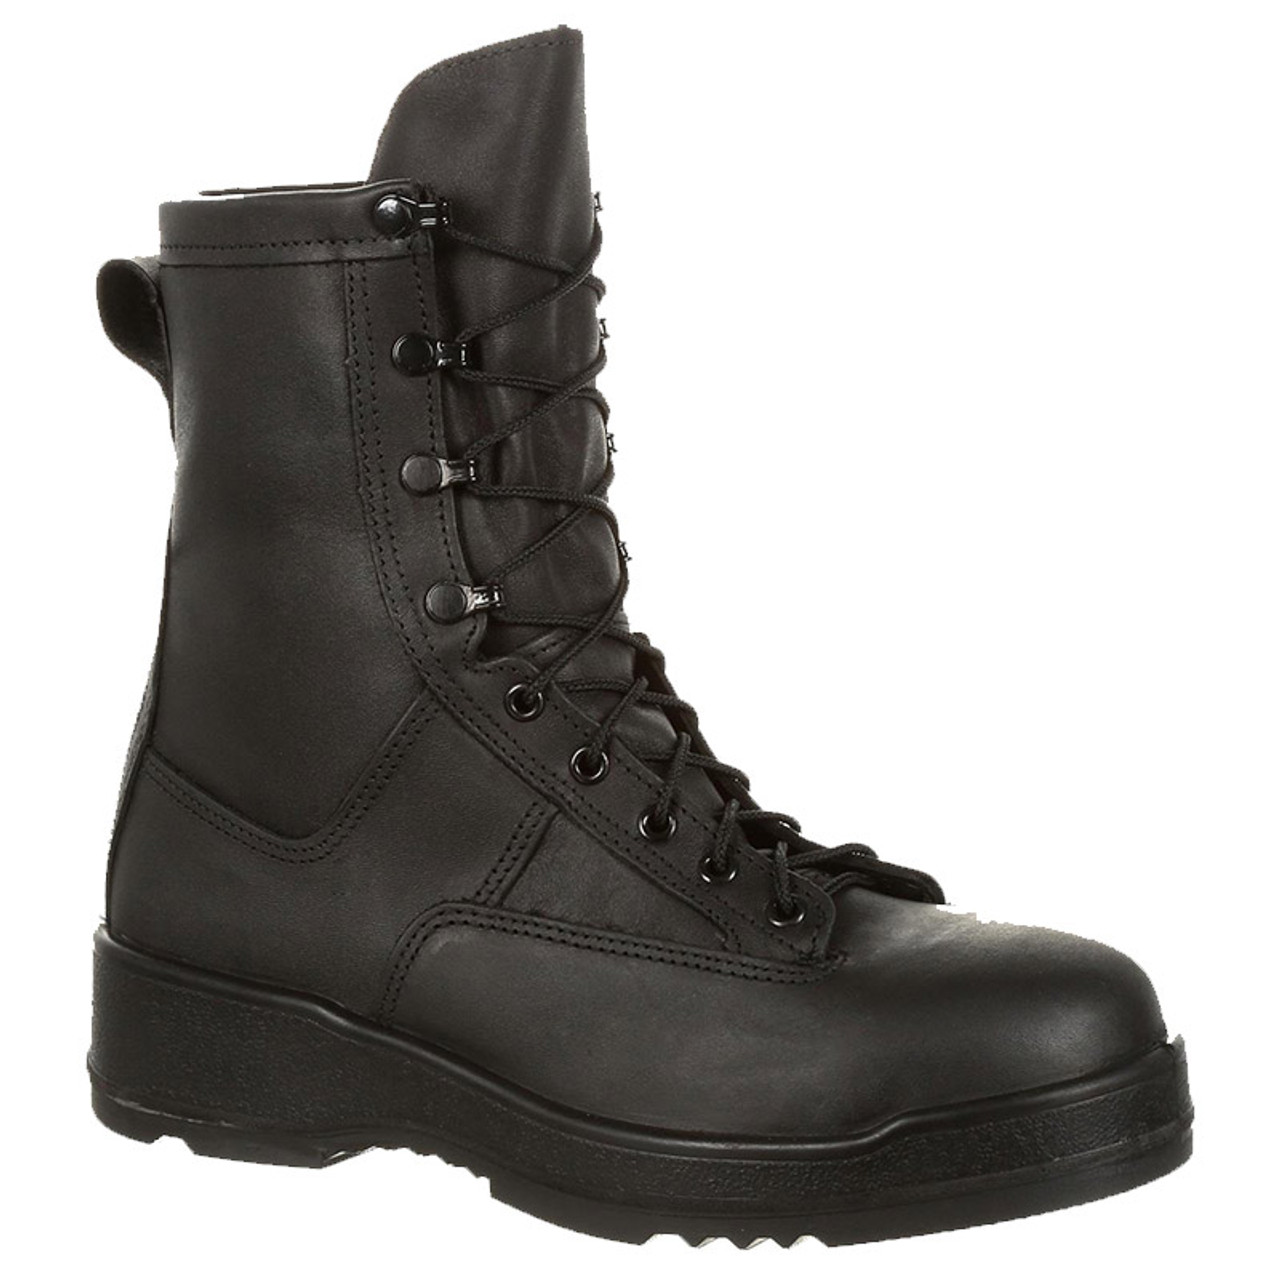 What are Tactical Boots: features and use